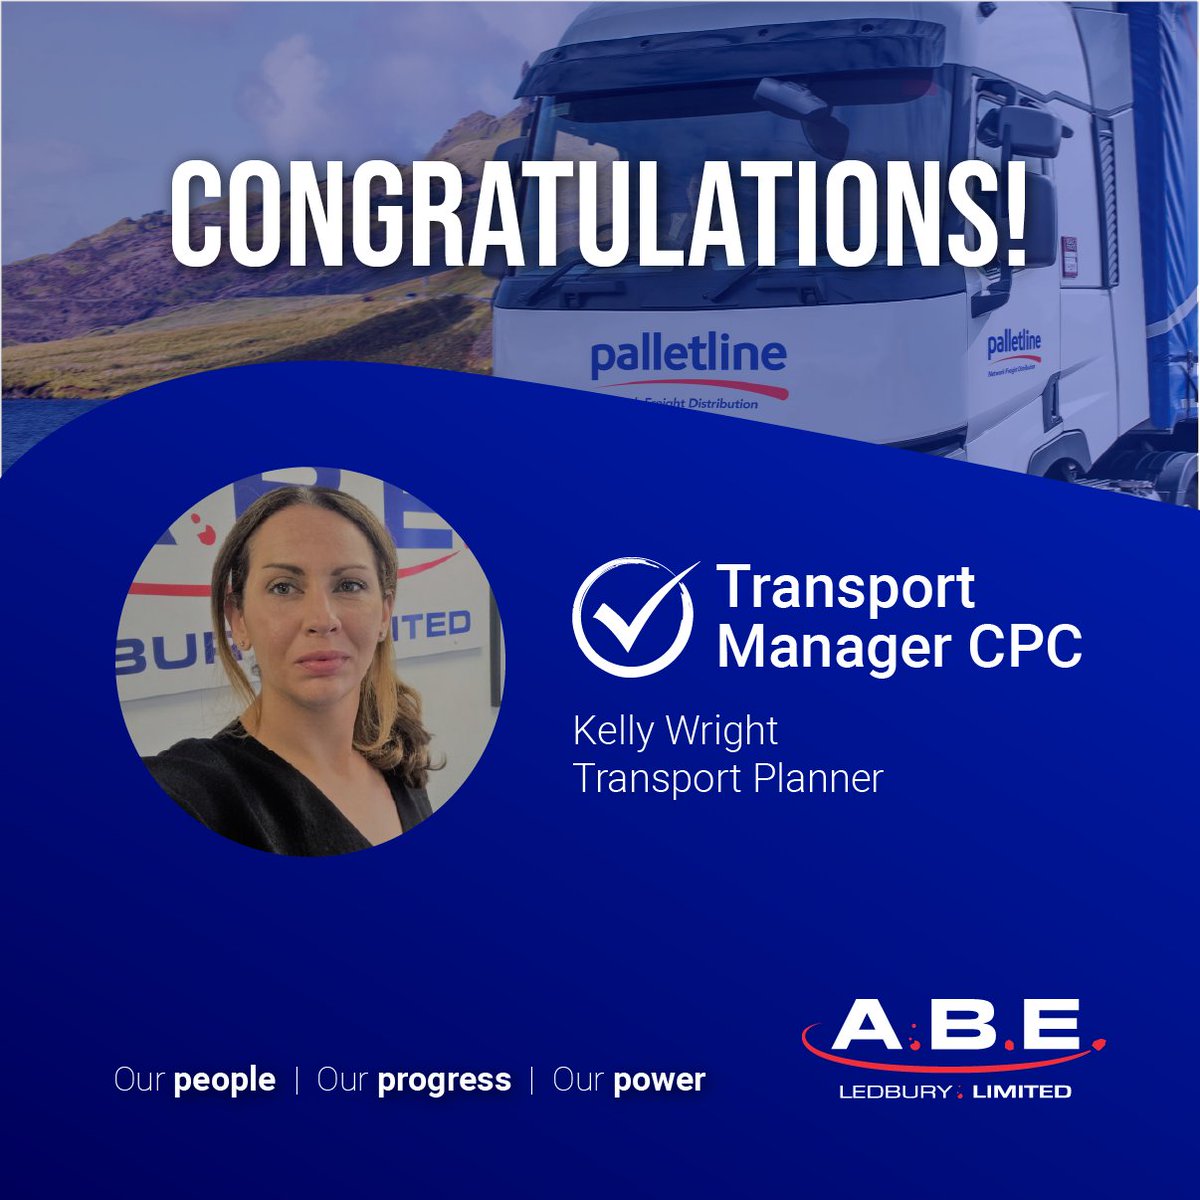 Well done to Kelly Wright - Transport Planner at ABE, for completing her Transport Manager CPC.🏅

#Transport #Logistics #TransportManager